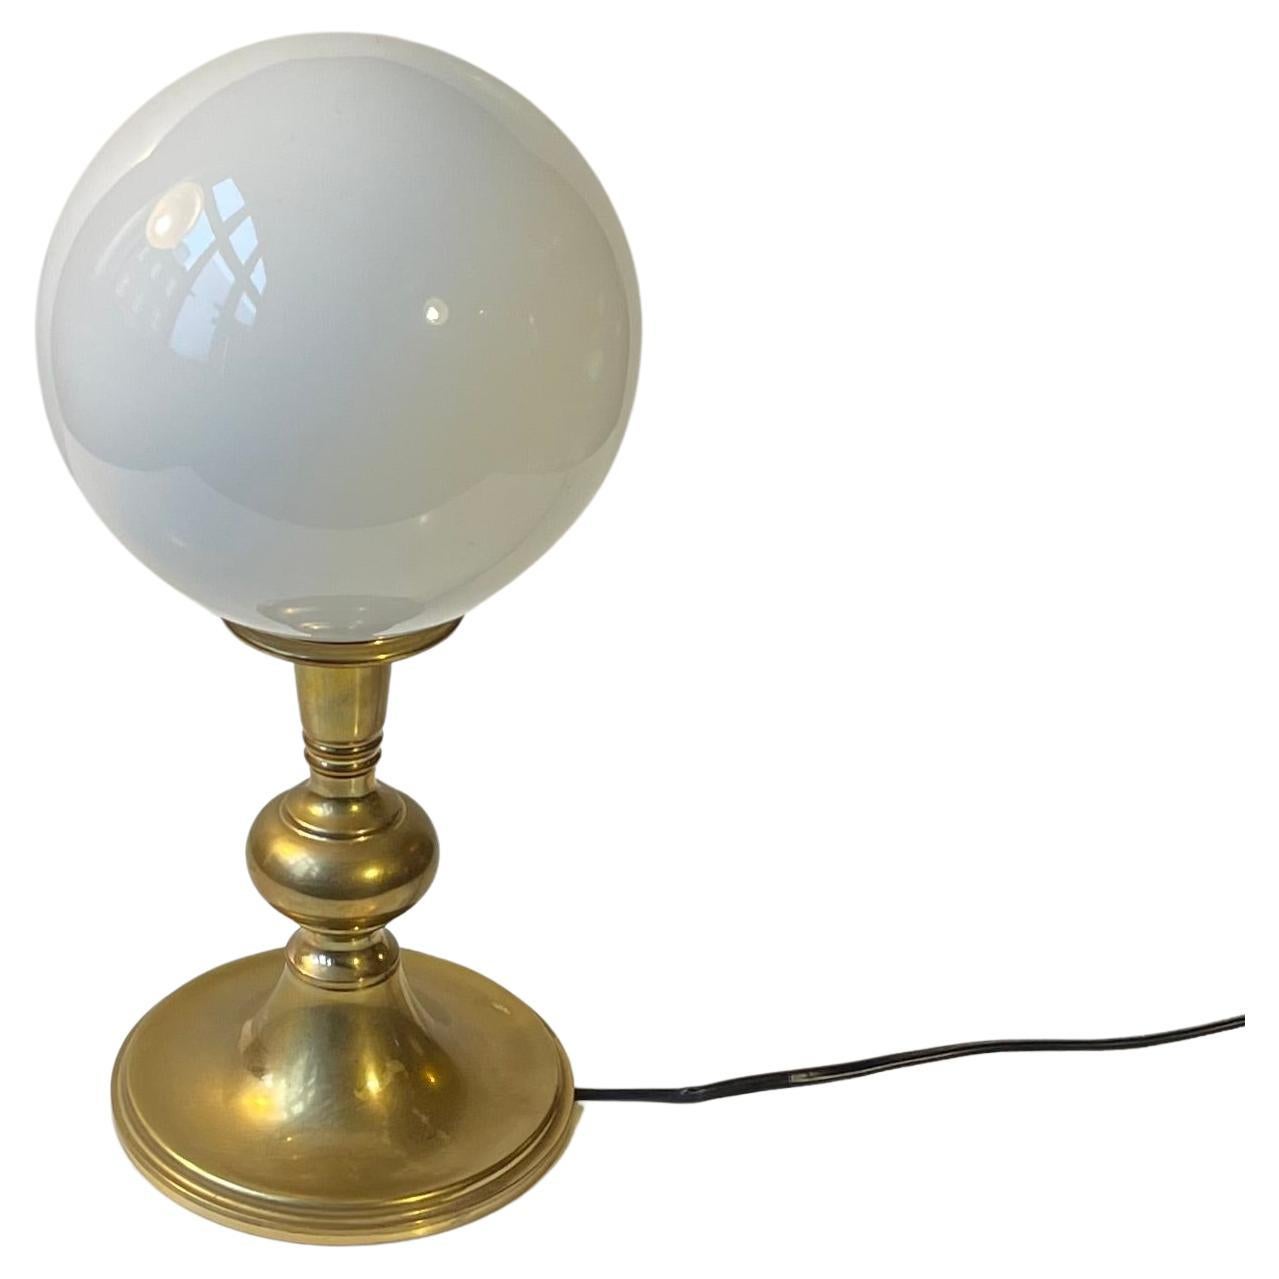 Simplistically composed Scandinavian Modern table Lamp. It features a heavy solid brass base and white opaline ball shade. It has an on/of switch to its cord. It was made in Sweden or Denmark during 1970s. The style of this light is Art Deco Revival